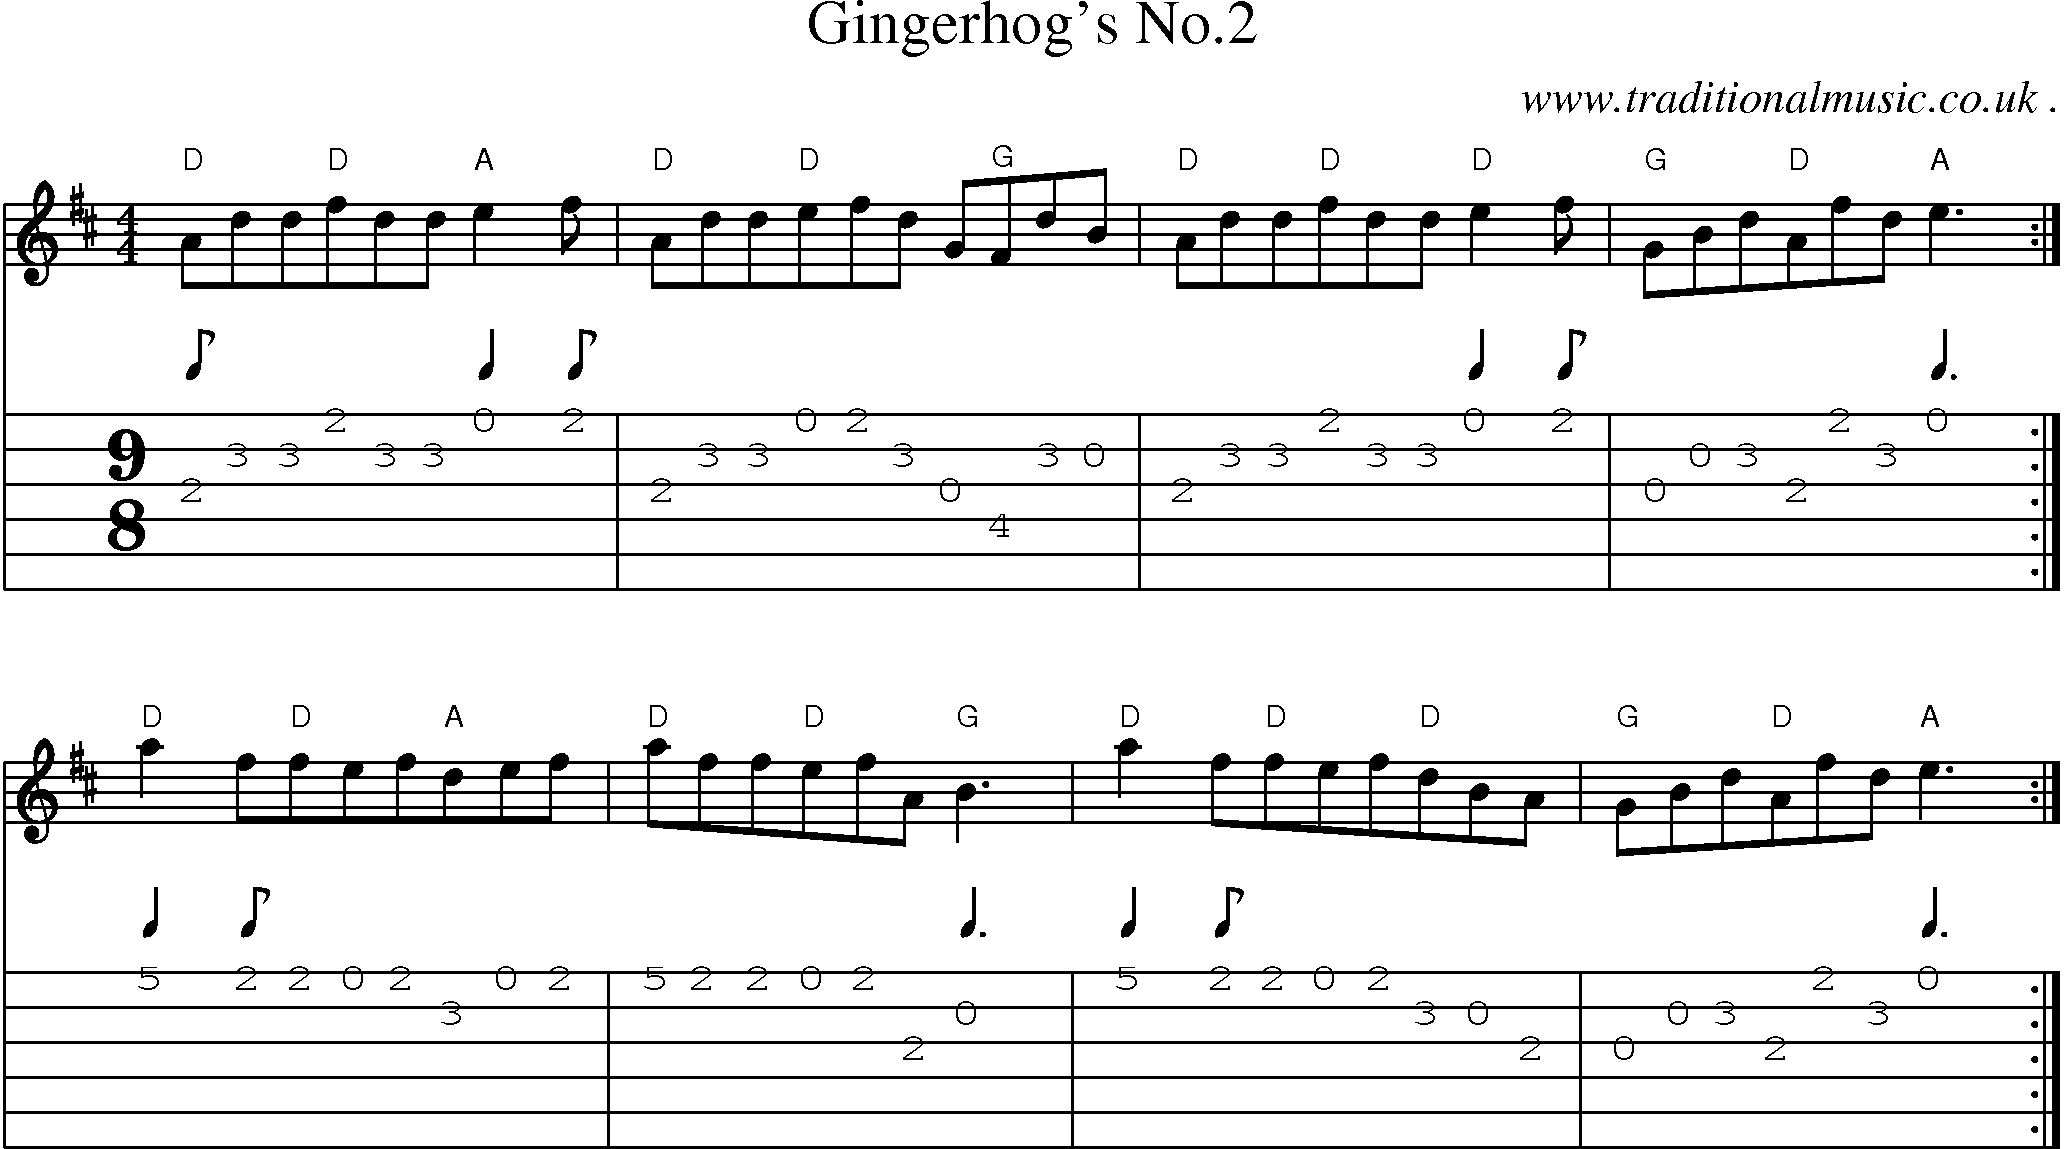 Sheet-Music and Guitar Tabs for Gingerhogs No2